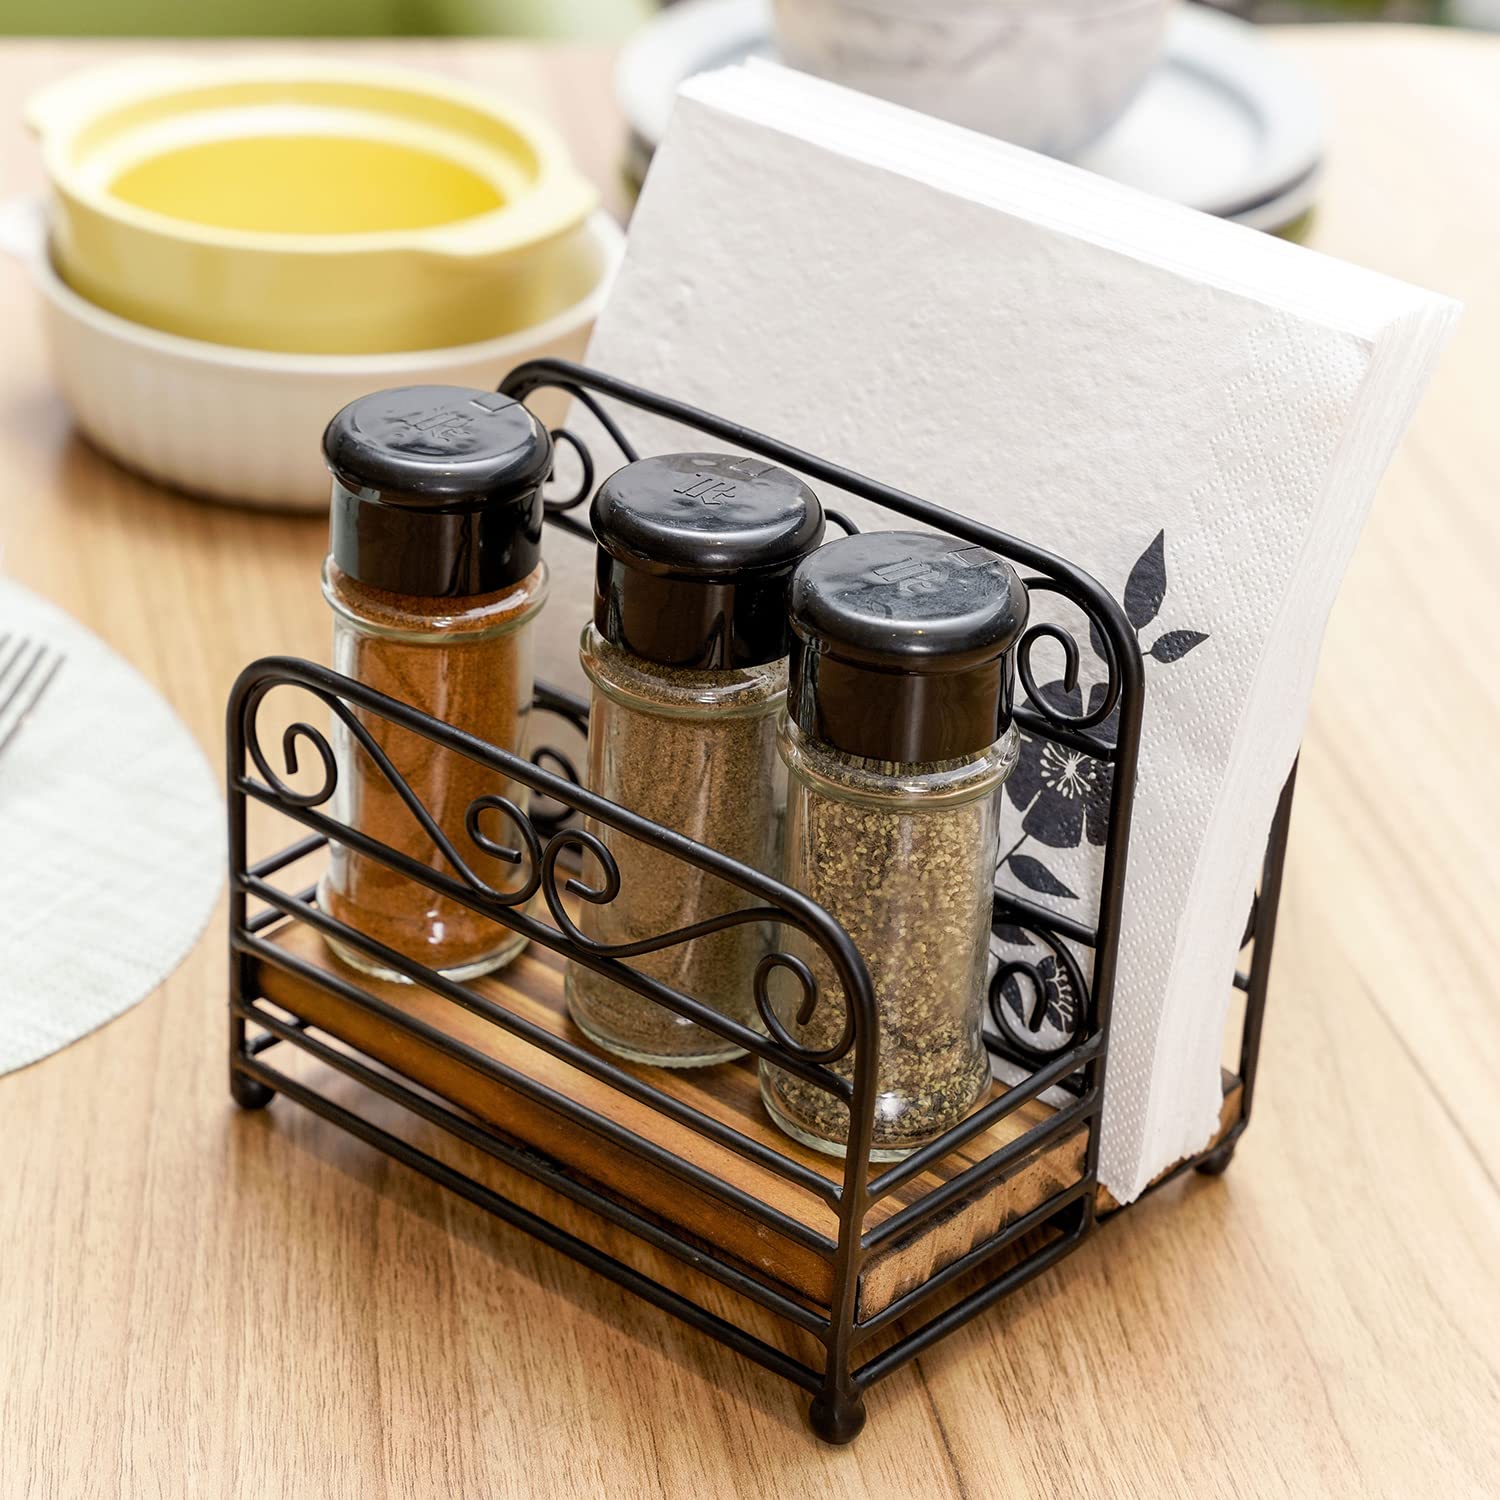 MyGift Black Metal and Burnt Wood Napkin Holder and Salt and Pepper Holder Caddy, Table Spice Jars and Condiment Napkin Rack with Vintage Scrollwork Design